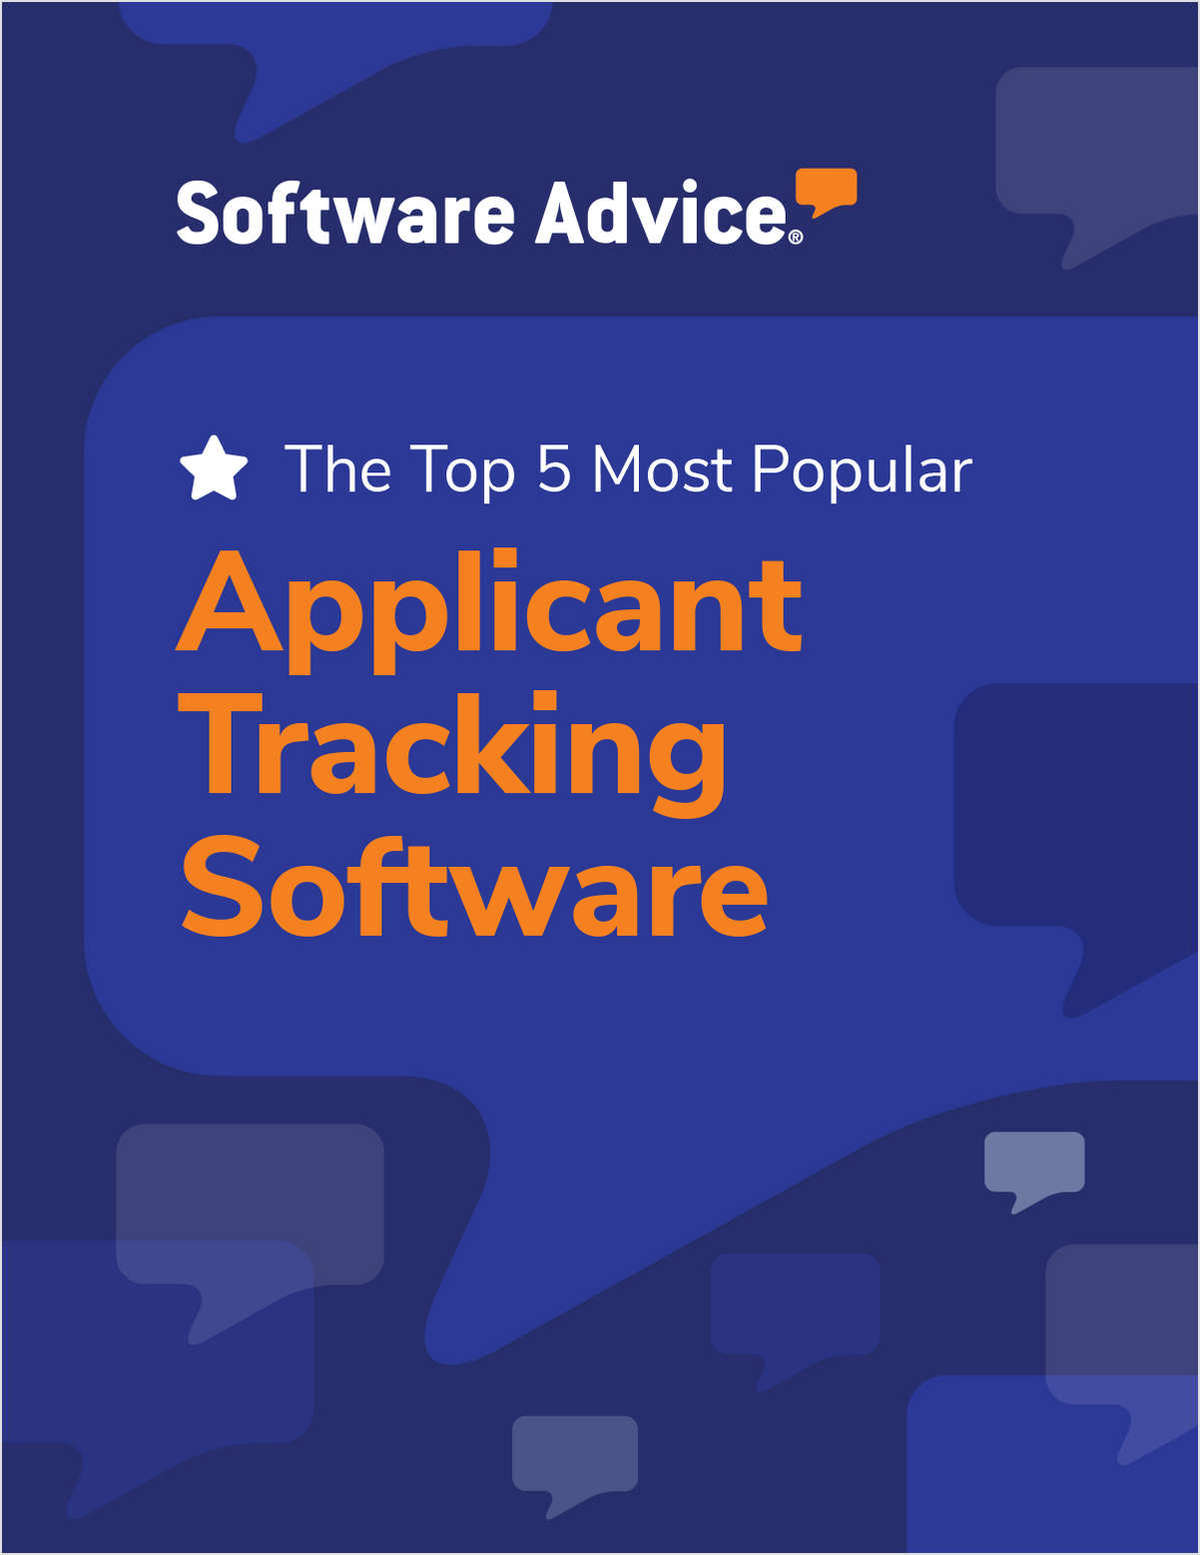 Top 5 Most Popular Applicant Tracking Software